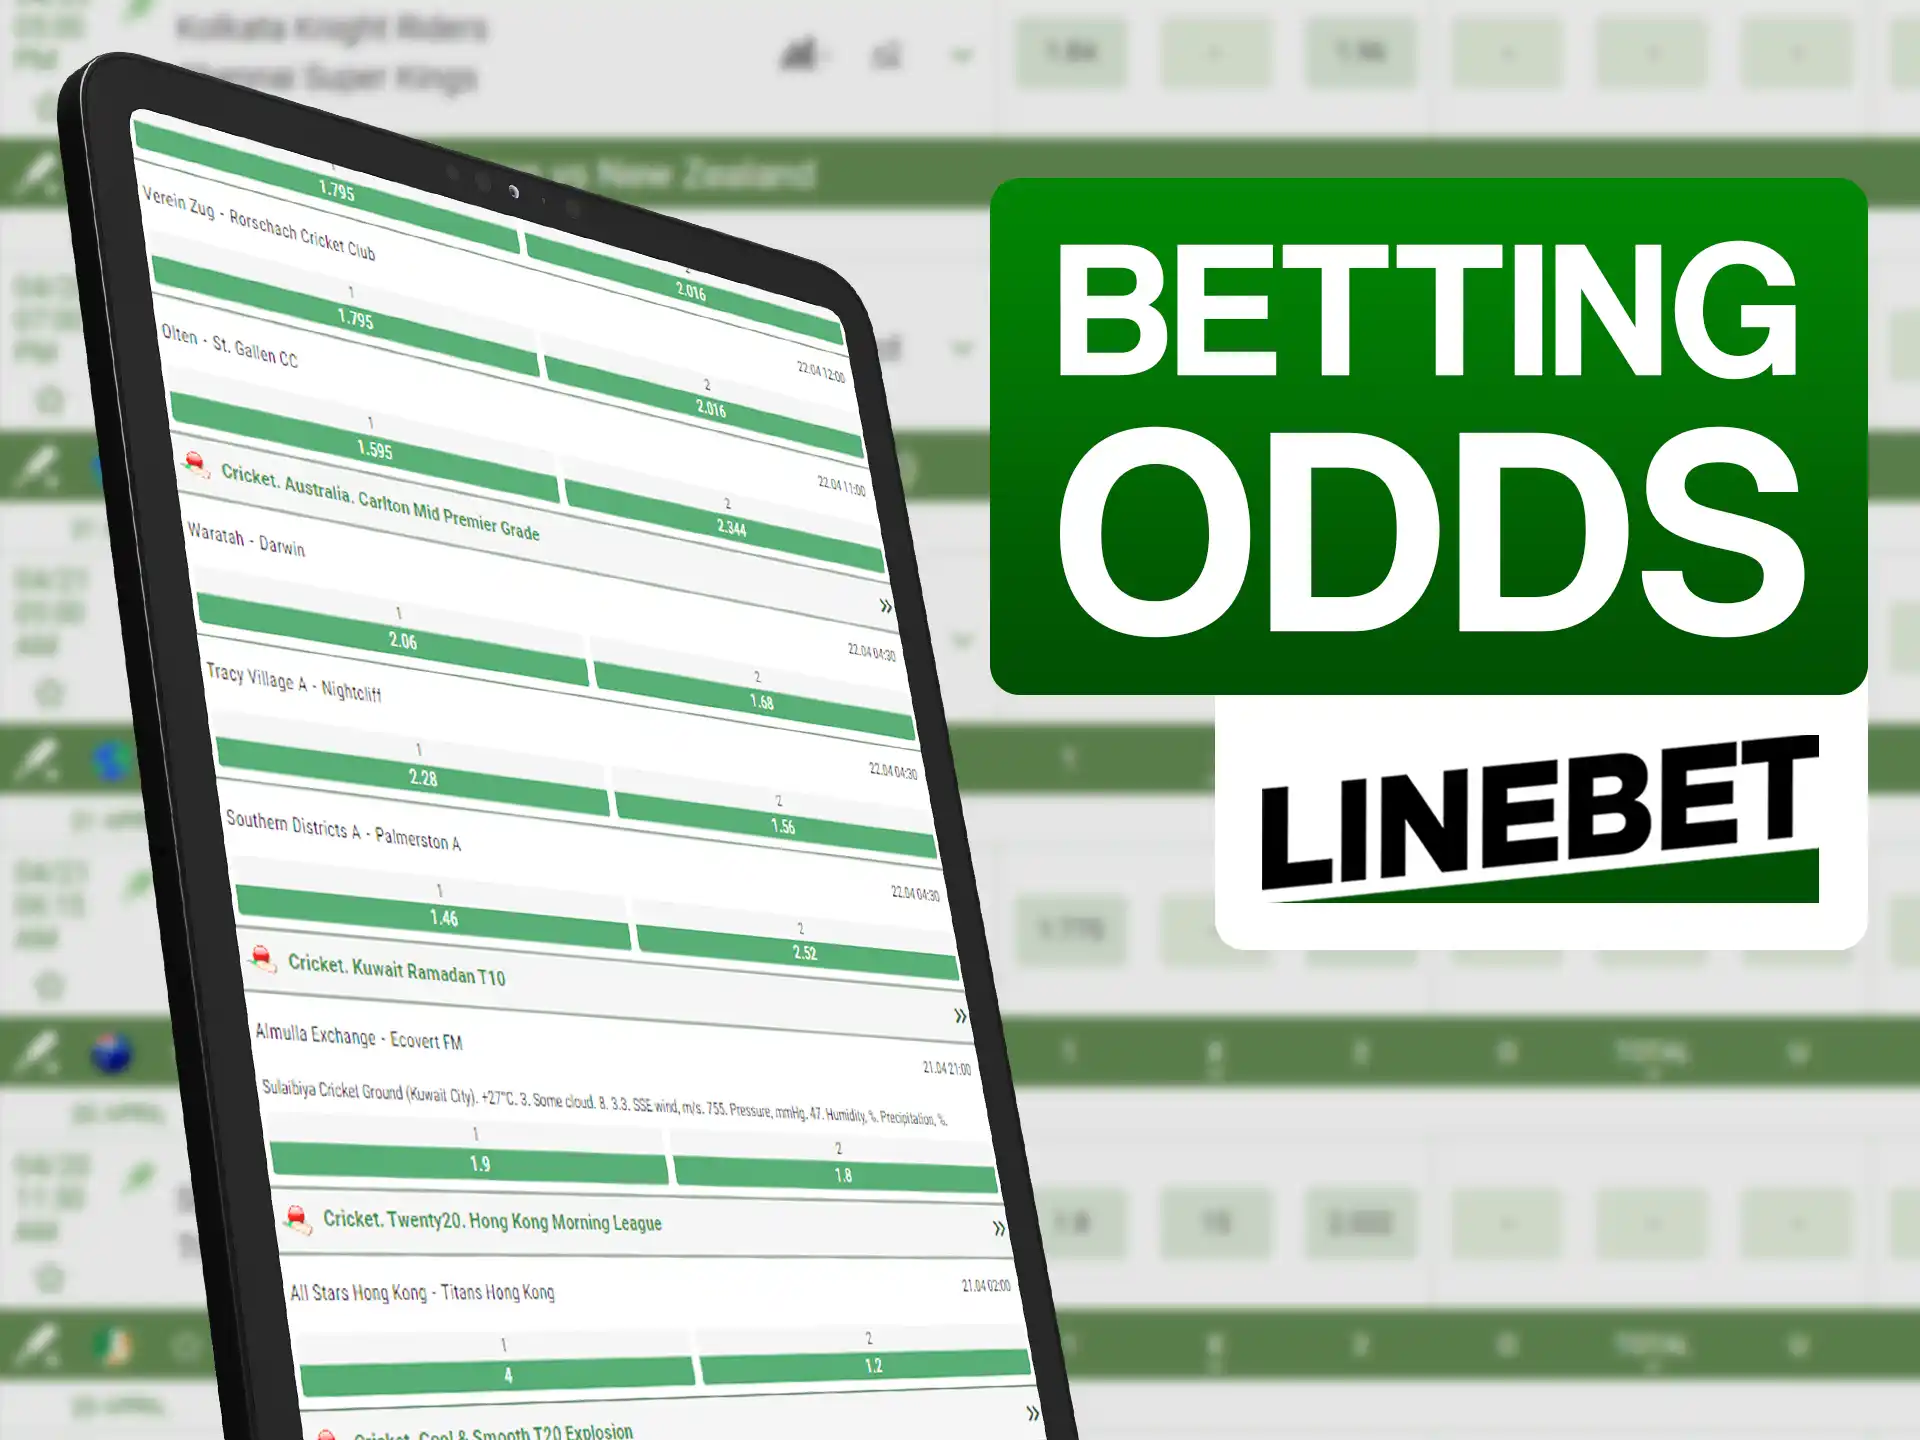 Calculate odds for next match on special Linebet page.